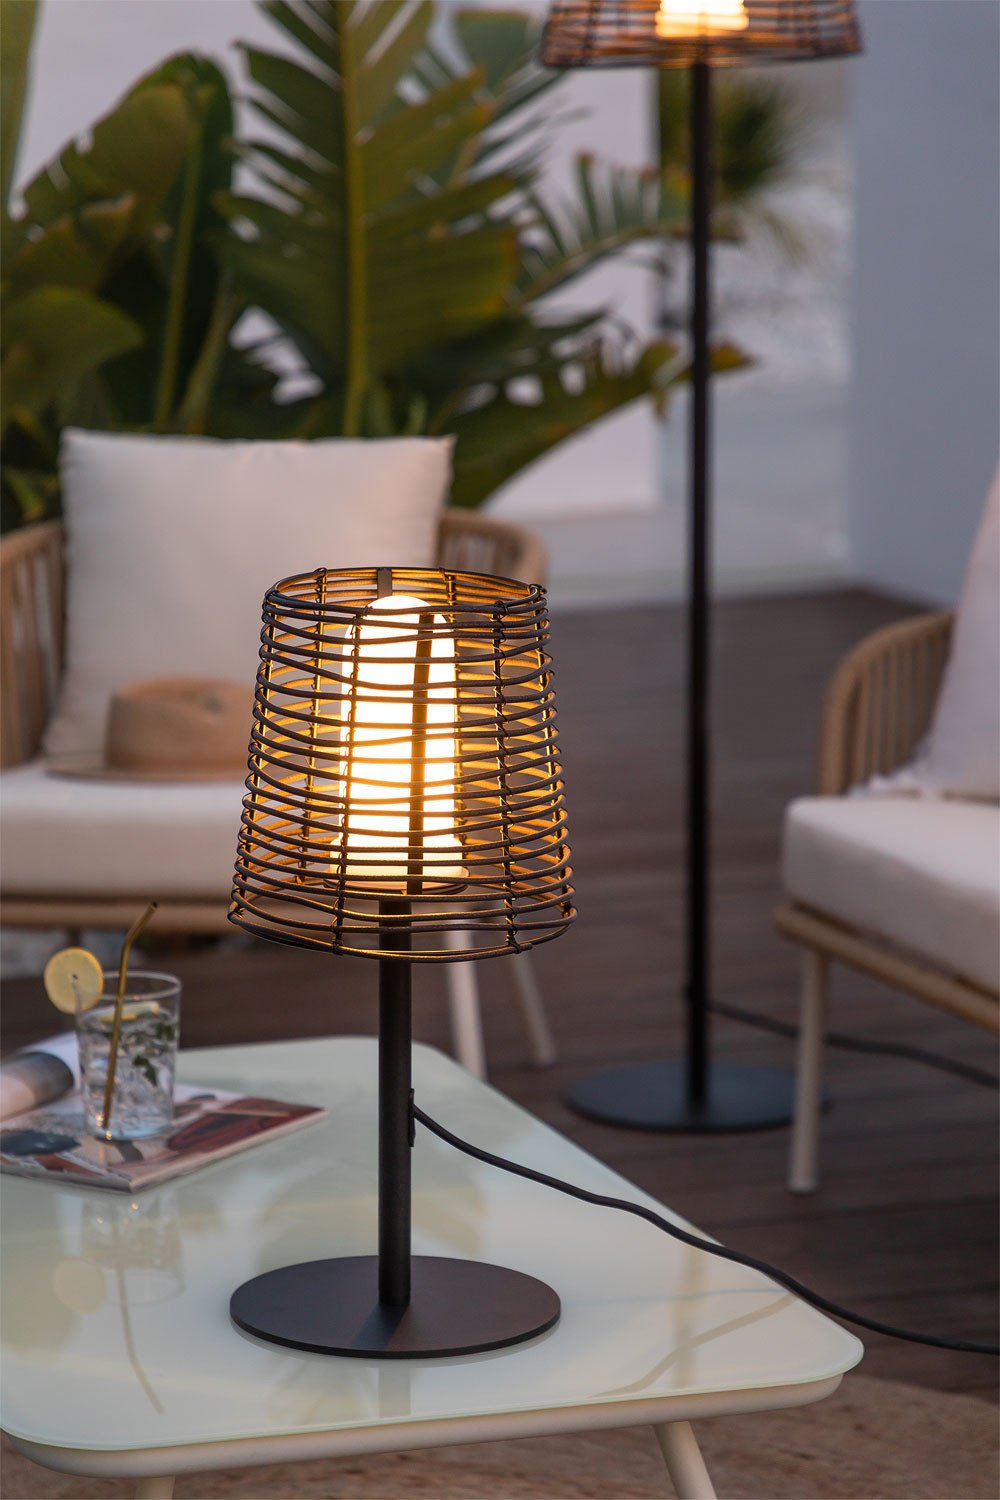 Wood Effect Outdoor Table Lamp Bissel, gallery image 1